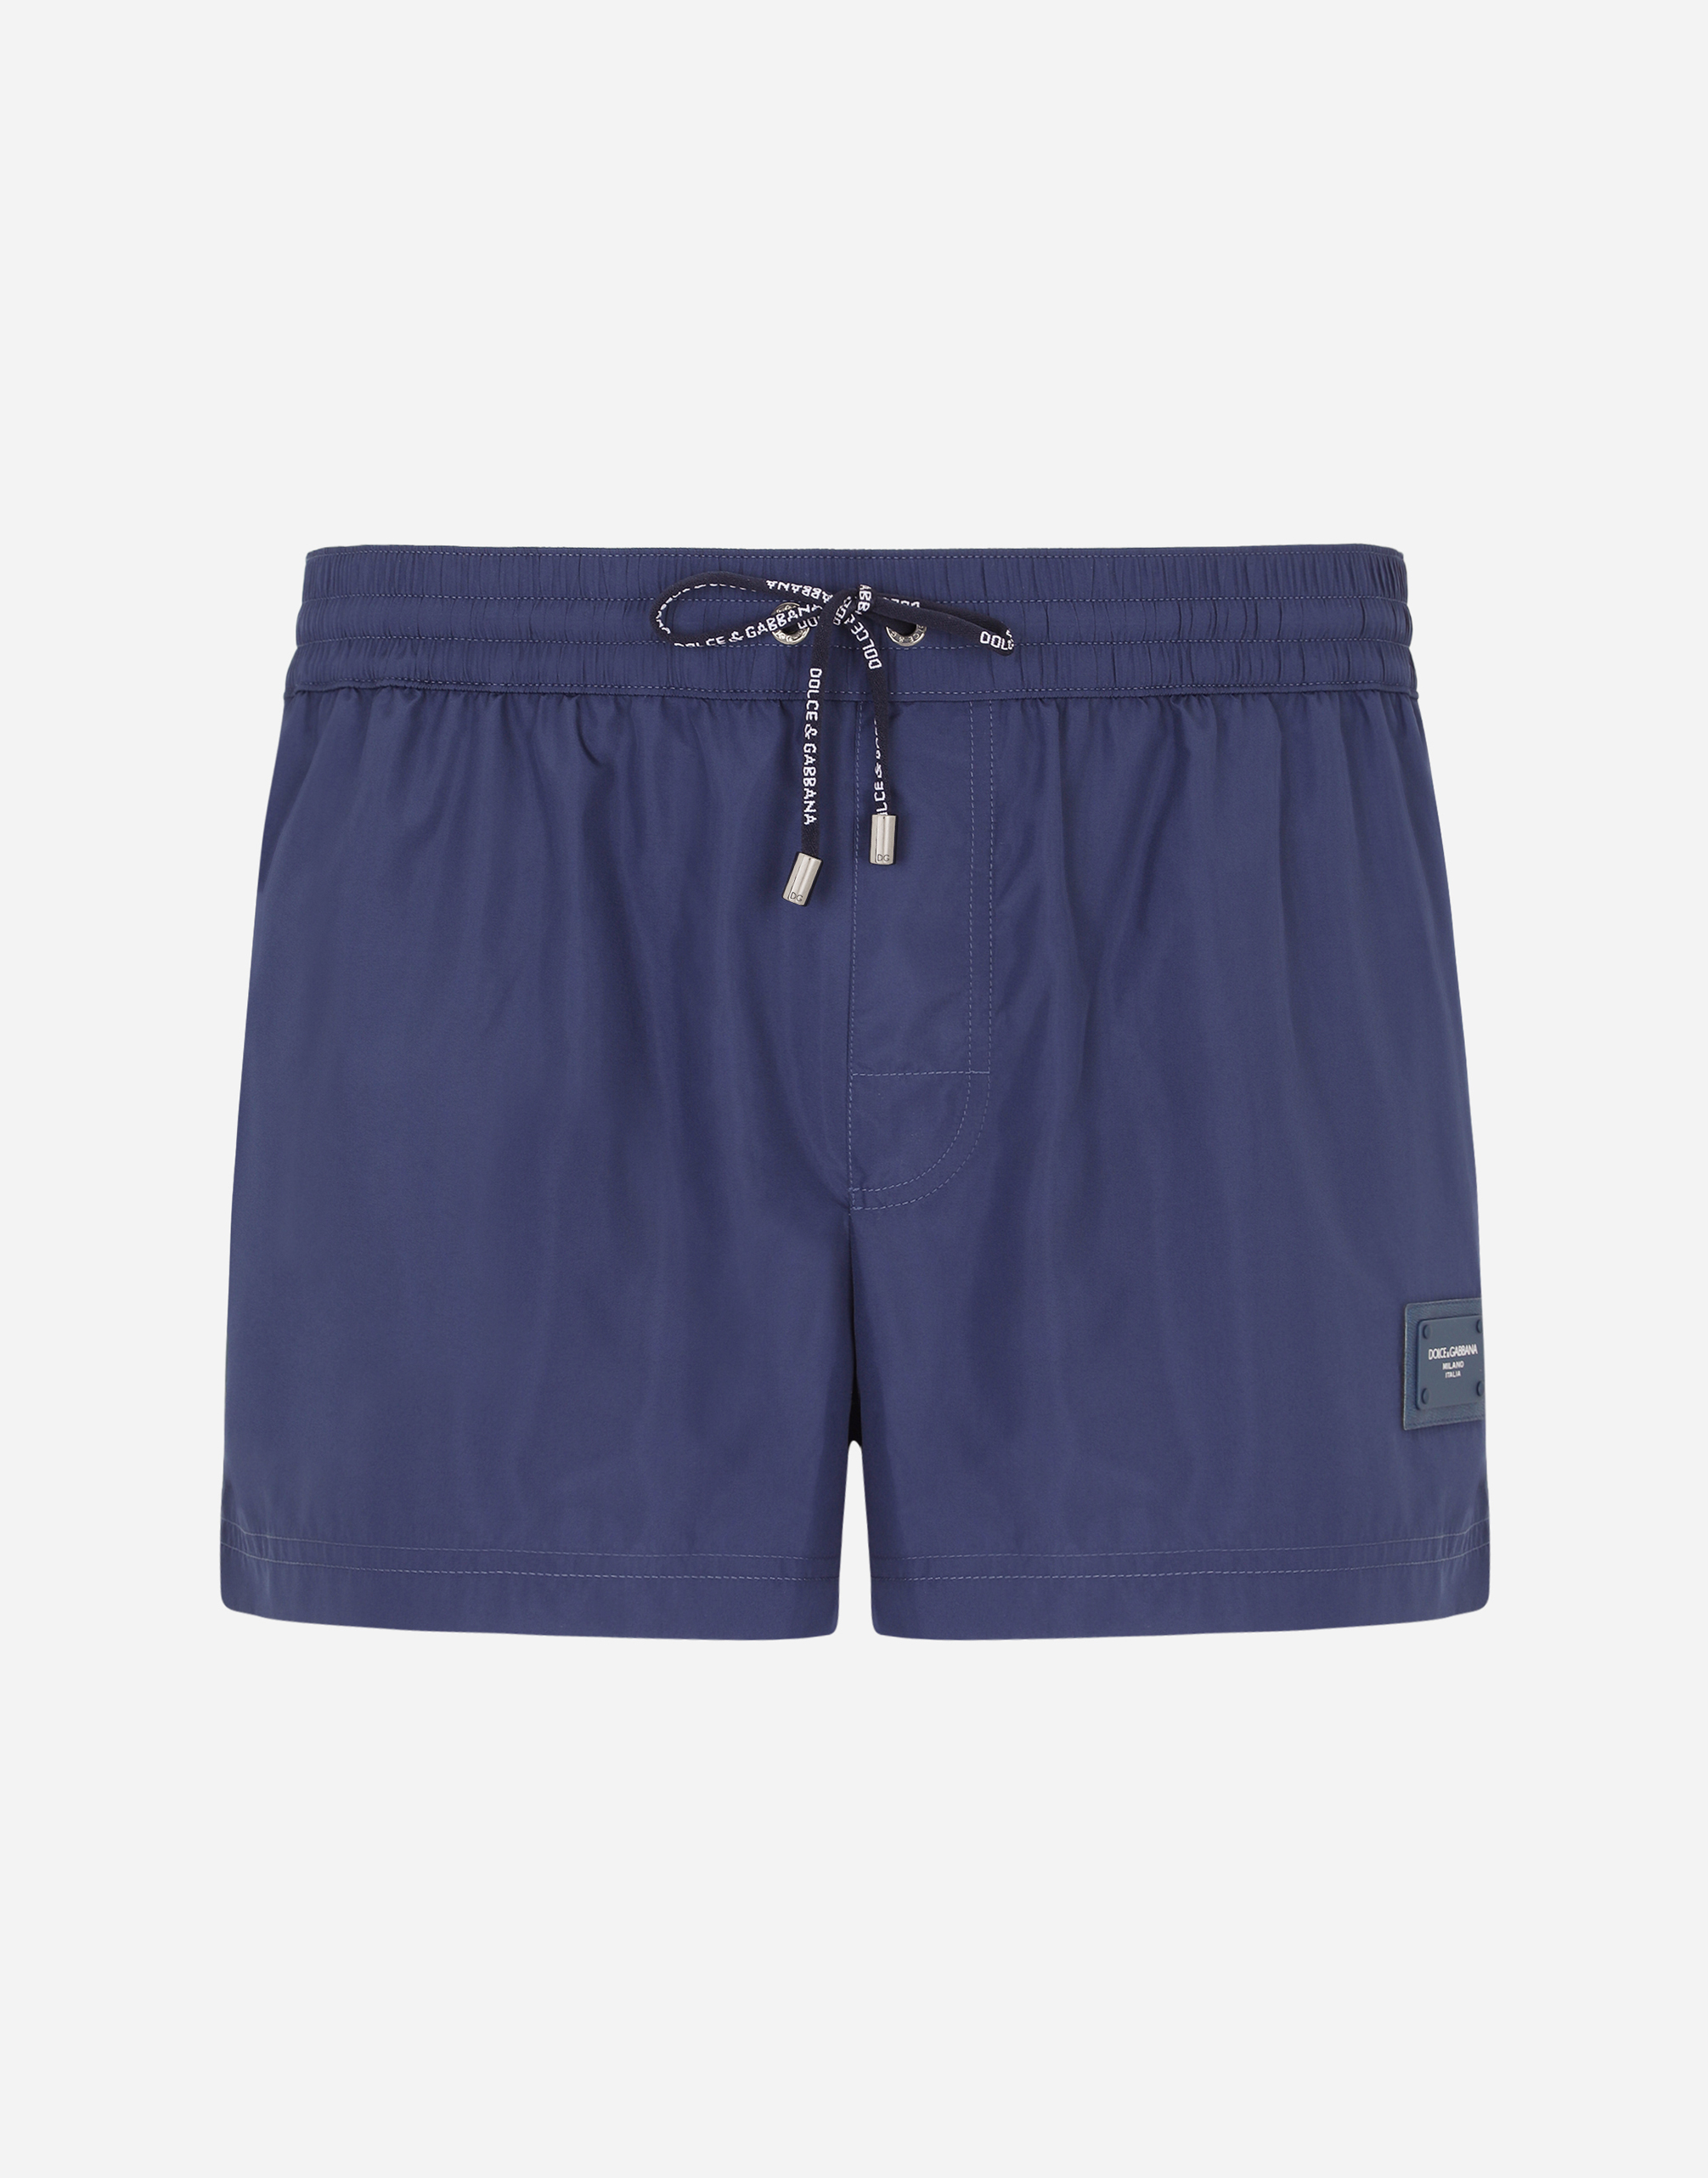 Short swim trunks with branded plate in Blue